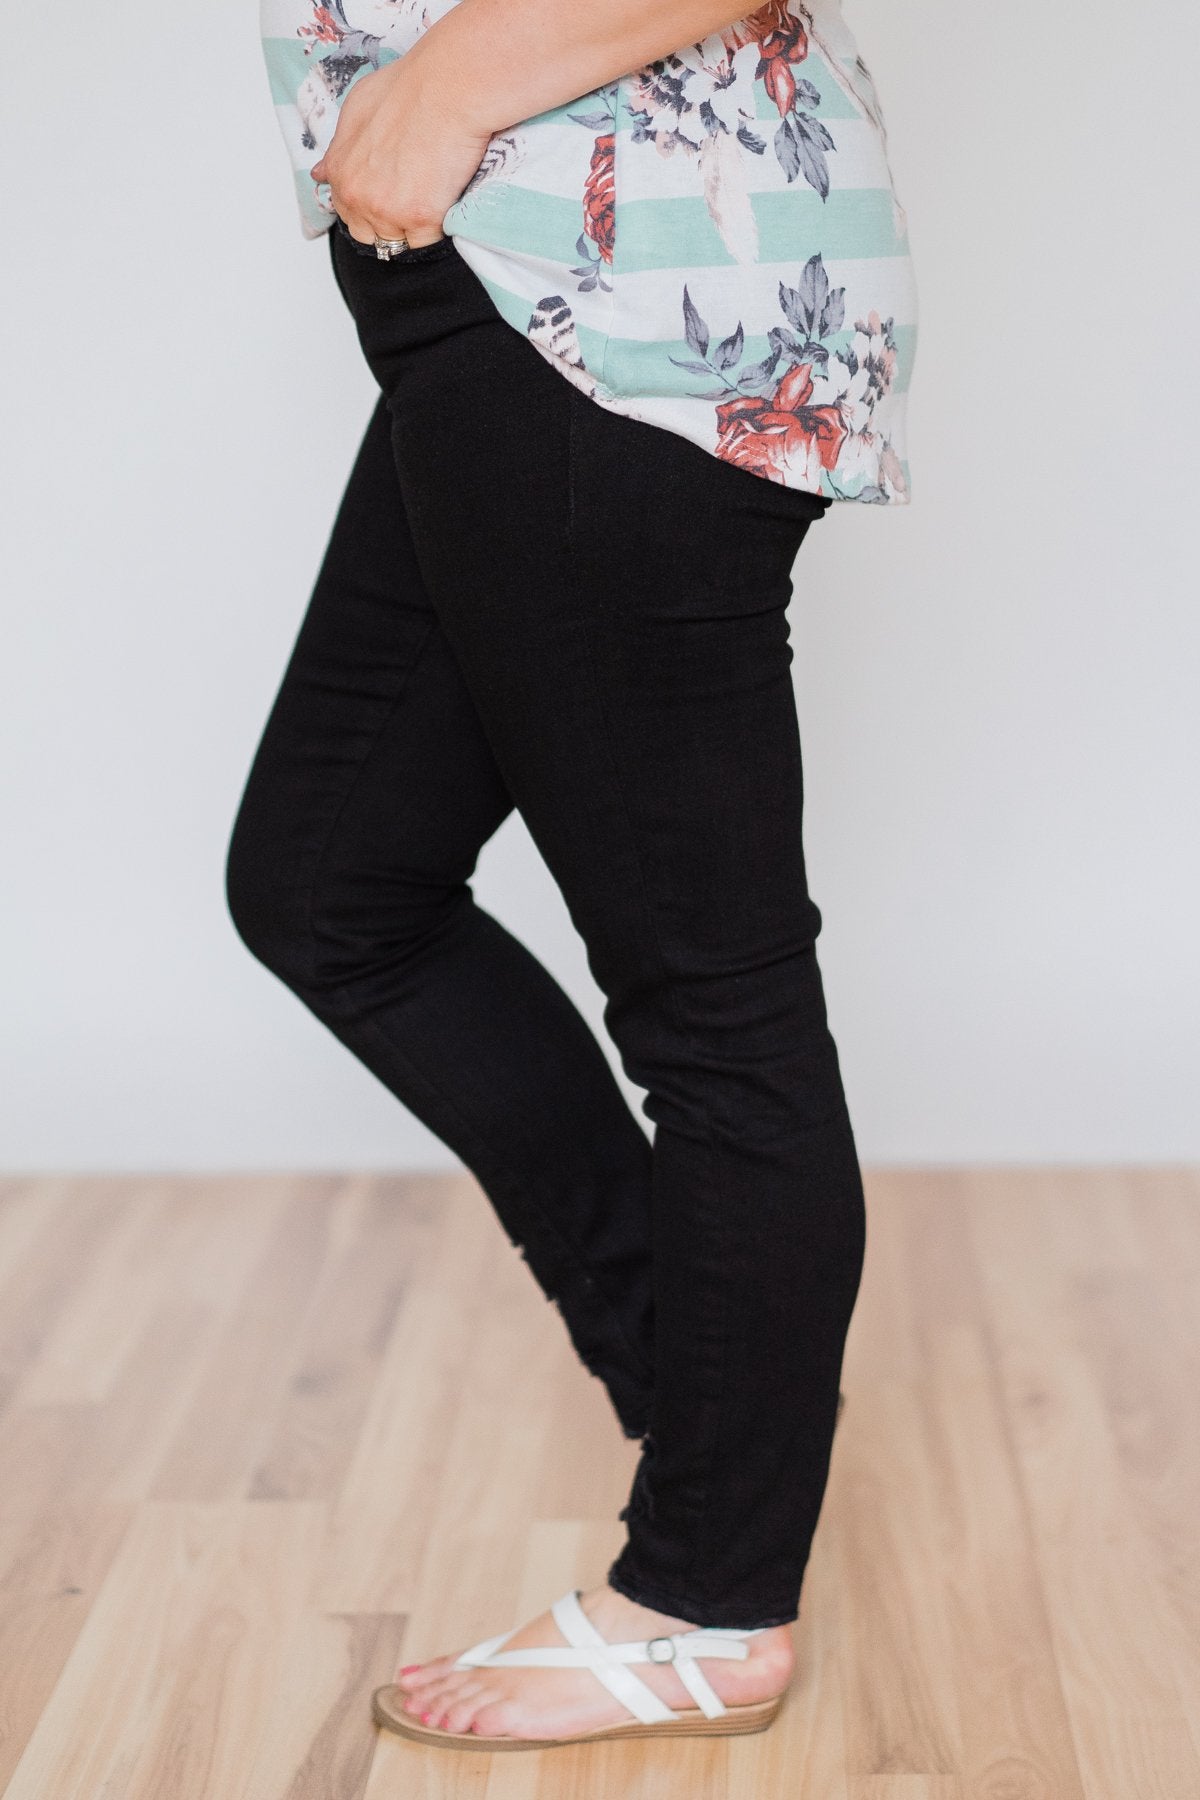 Kan Can Black Distressed Skinny Jeans